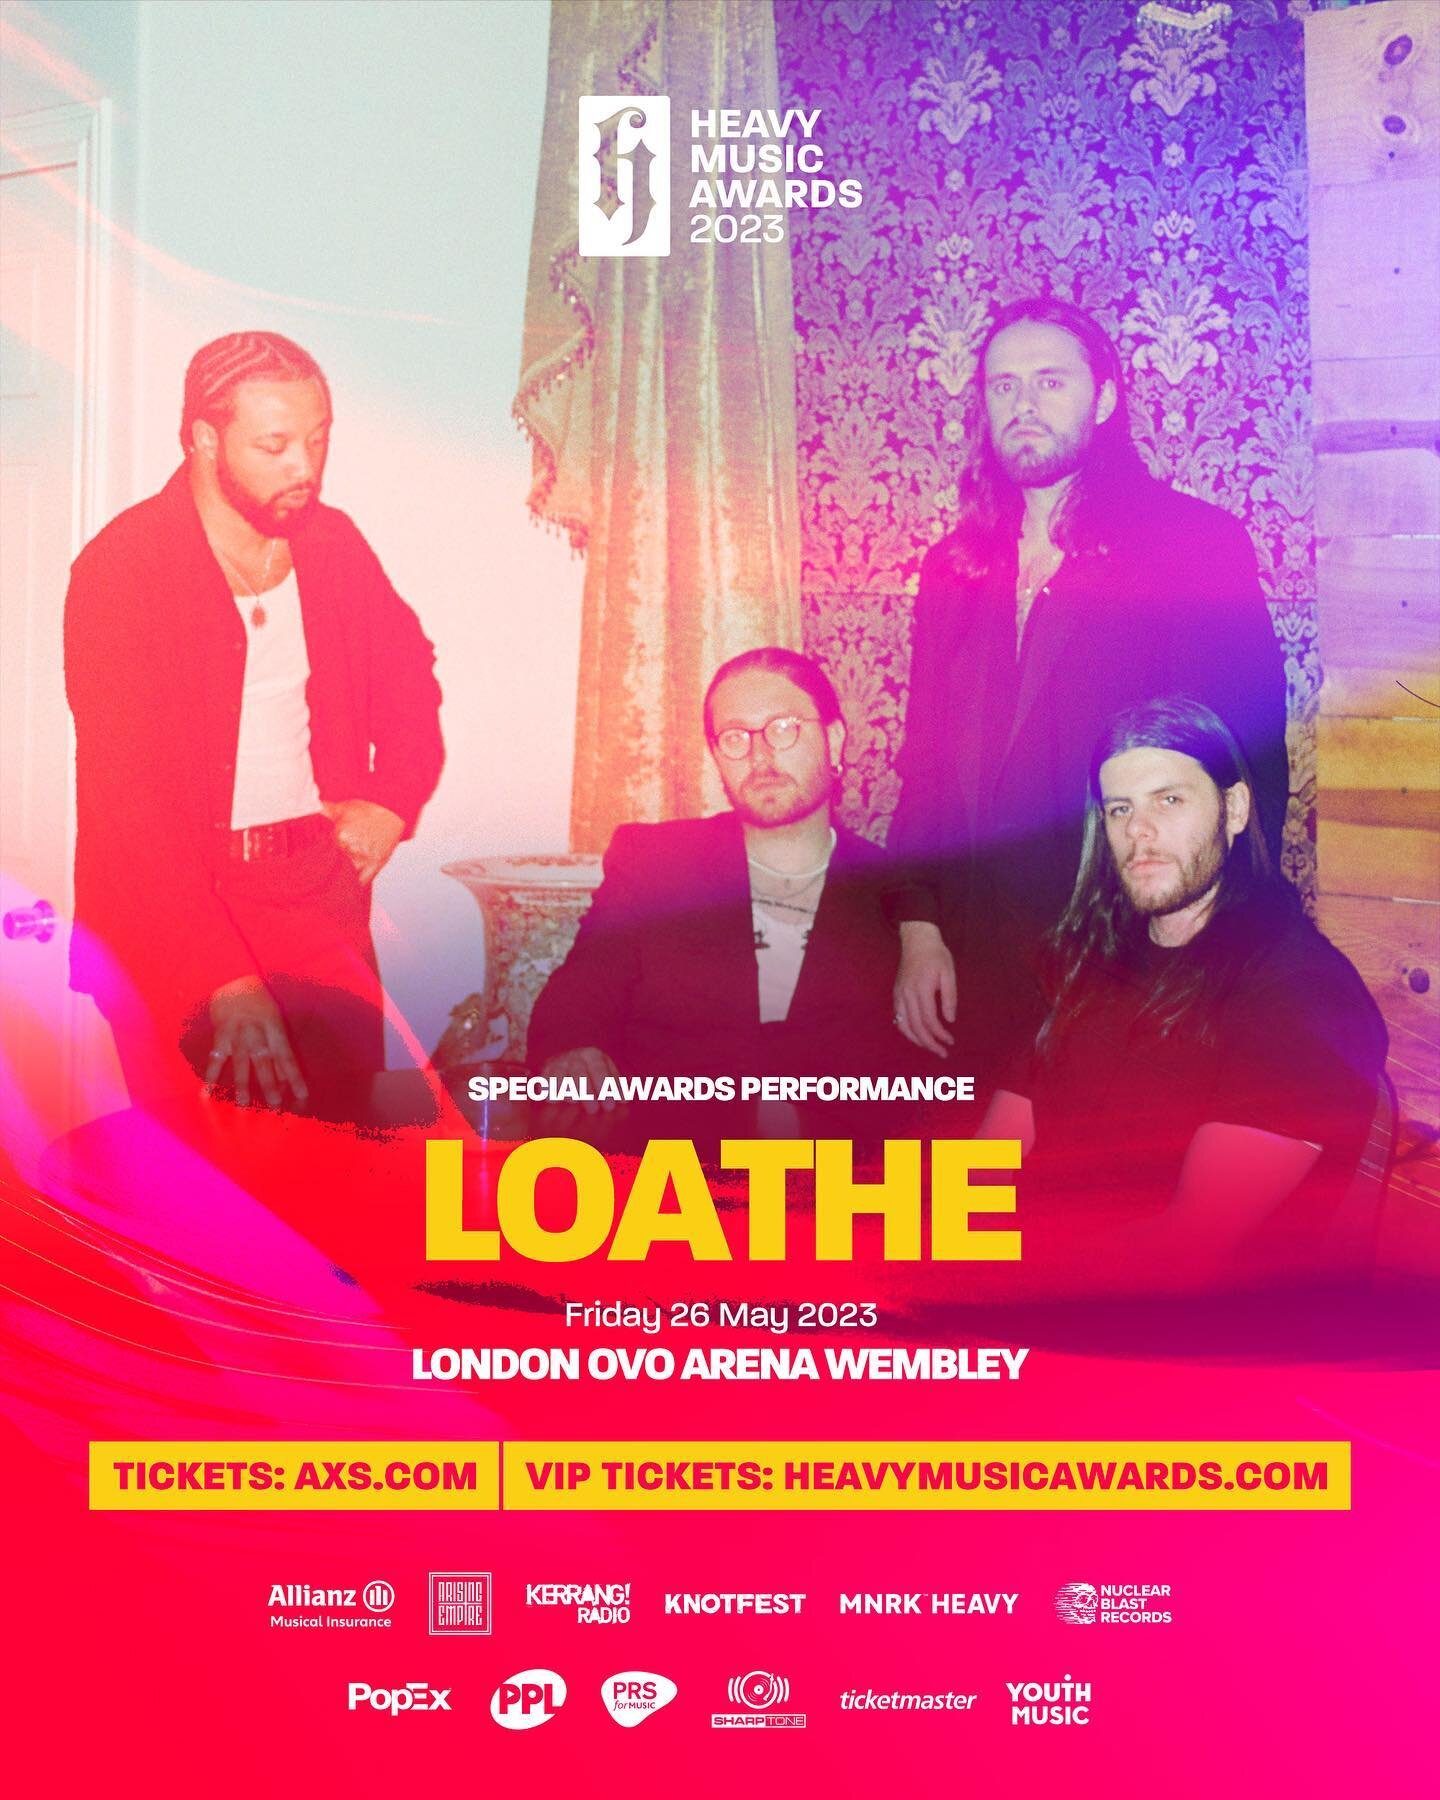 We are hugely excited to share that Loathe will be performing at #HMA23 on Friday 26 May at OVO Arena Wembley 🔥

Fresh from their appearance at Sick New World in Las Vegas, they will be joining our already stacked af line-up including - 

BOSTON MAN